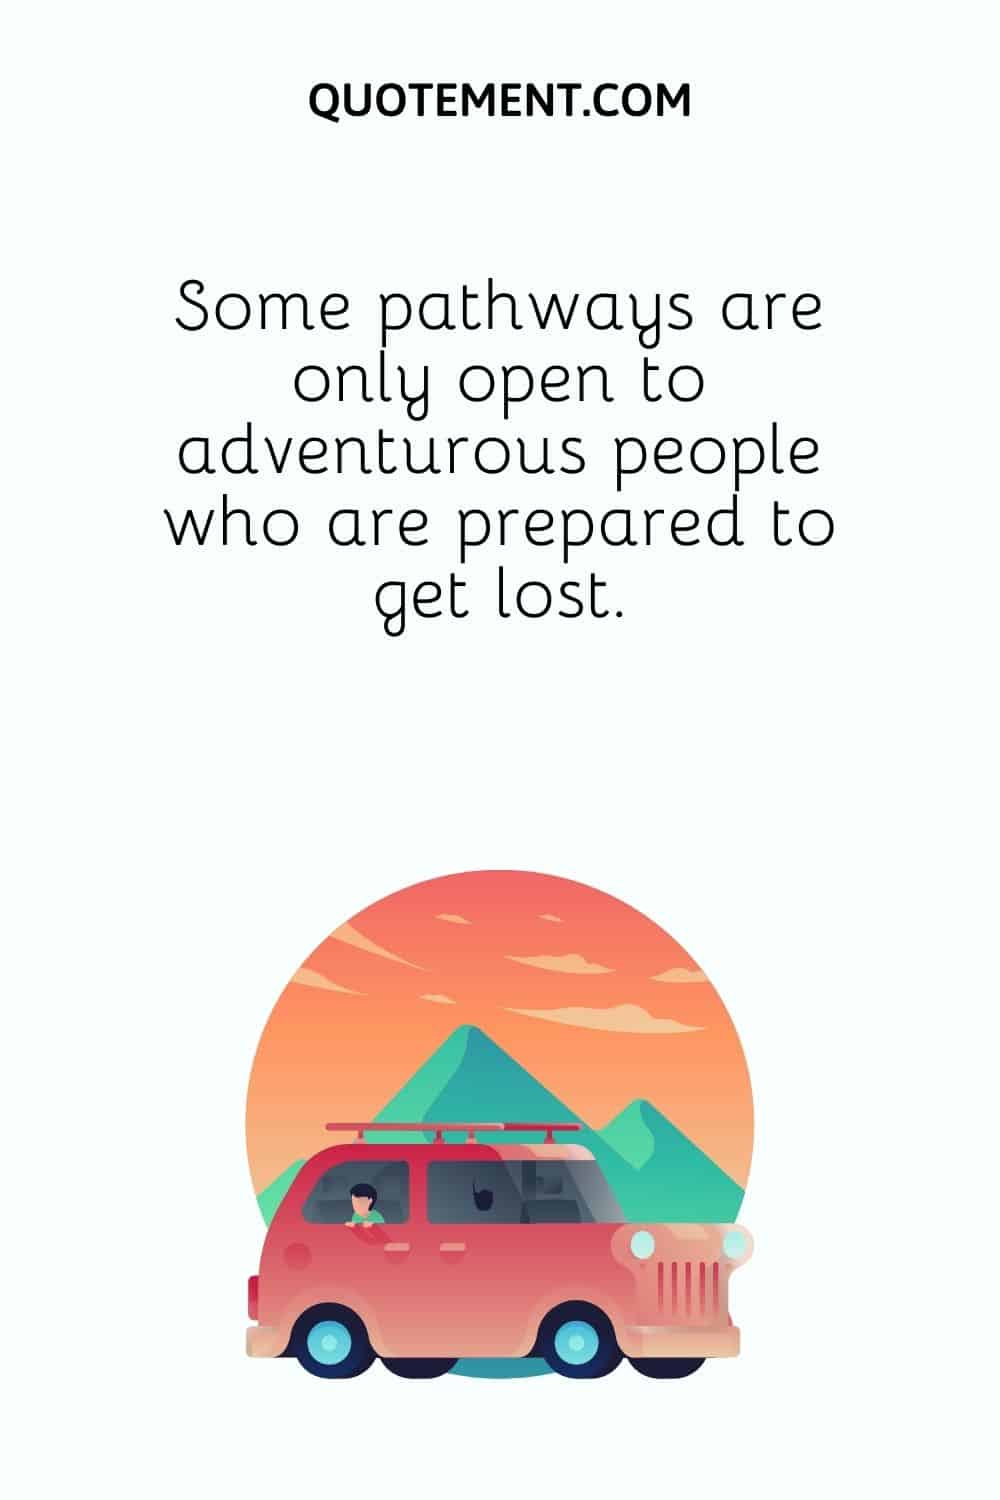 Some pathways are only open to adventurous people who are prepared to get lost